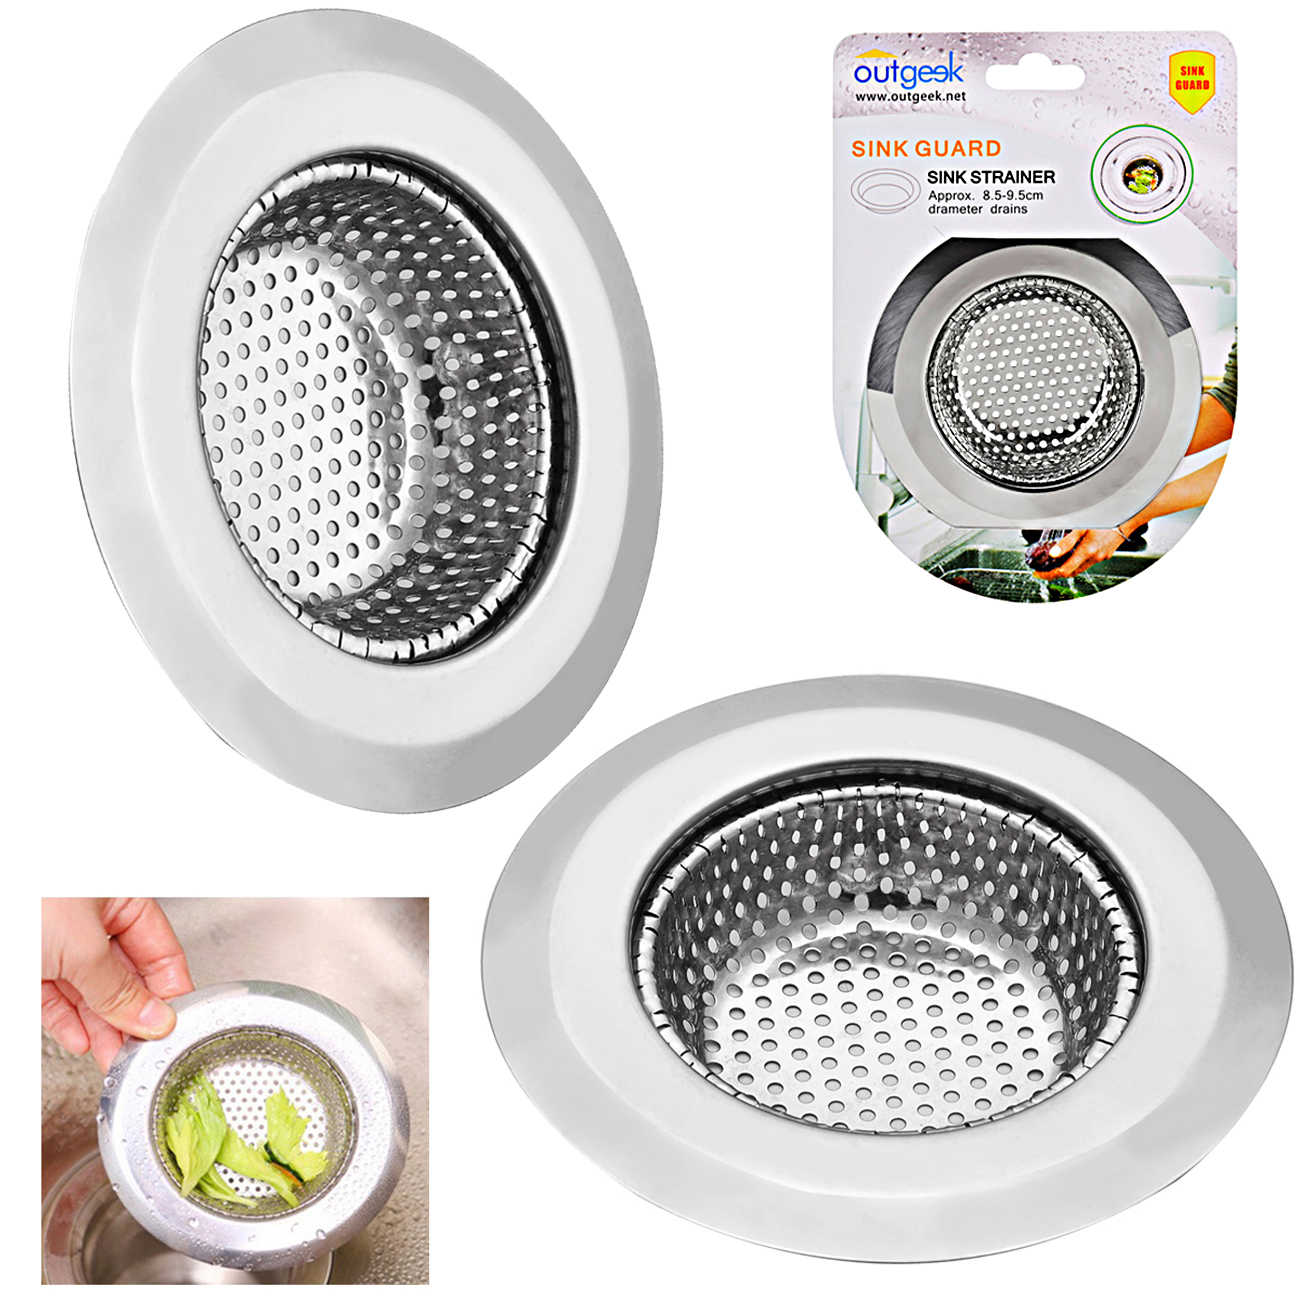 Outgeek 2 Pack Sink Strainer Stainless Steel Sink Strainer for Kitchen Sinks with Wide Rim